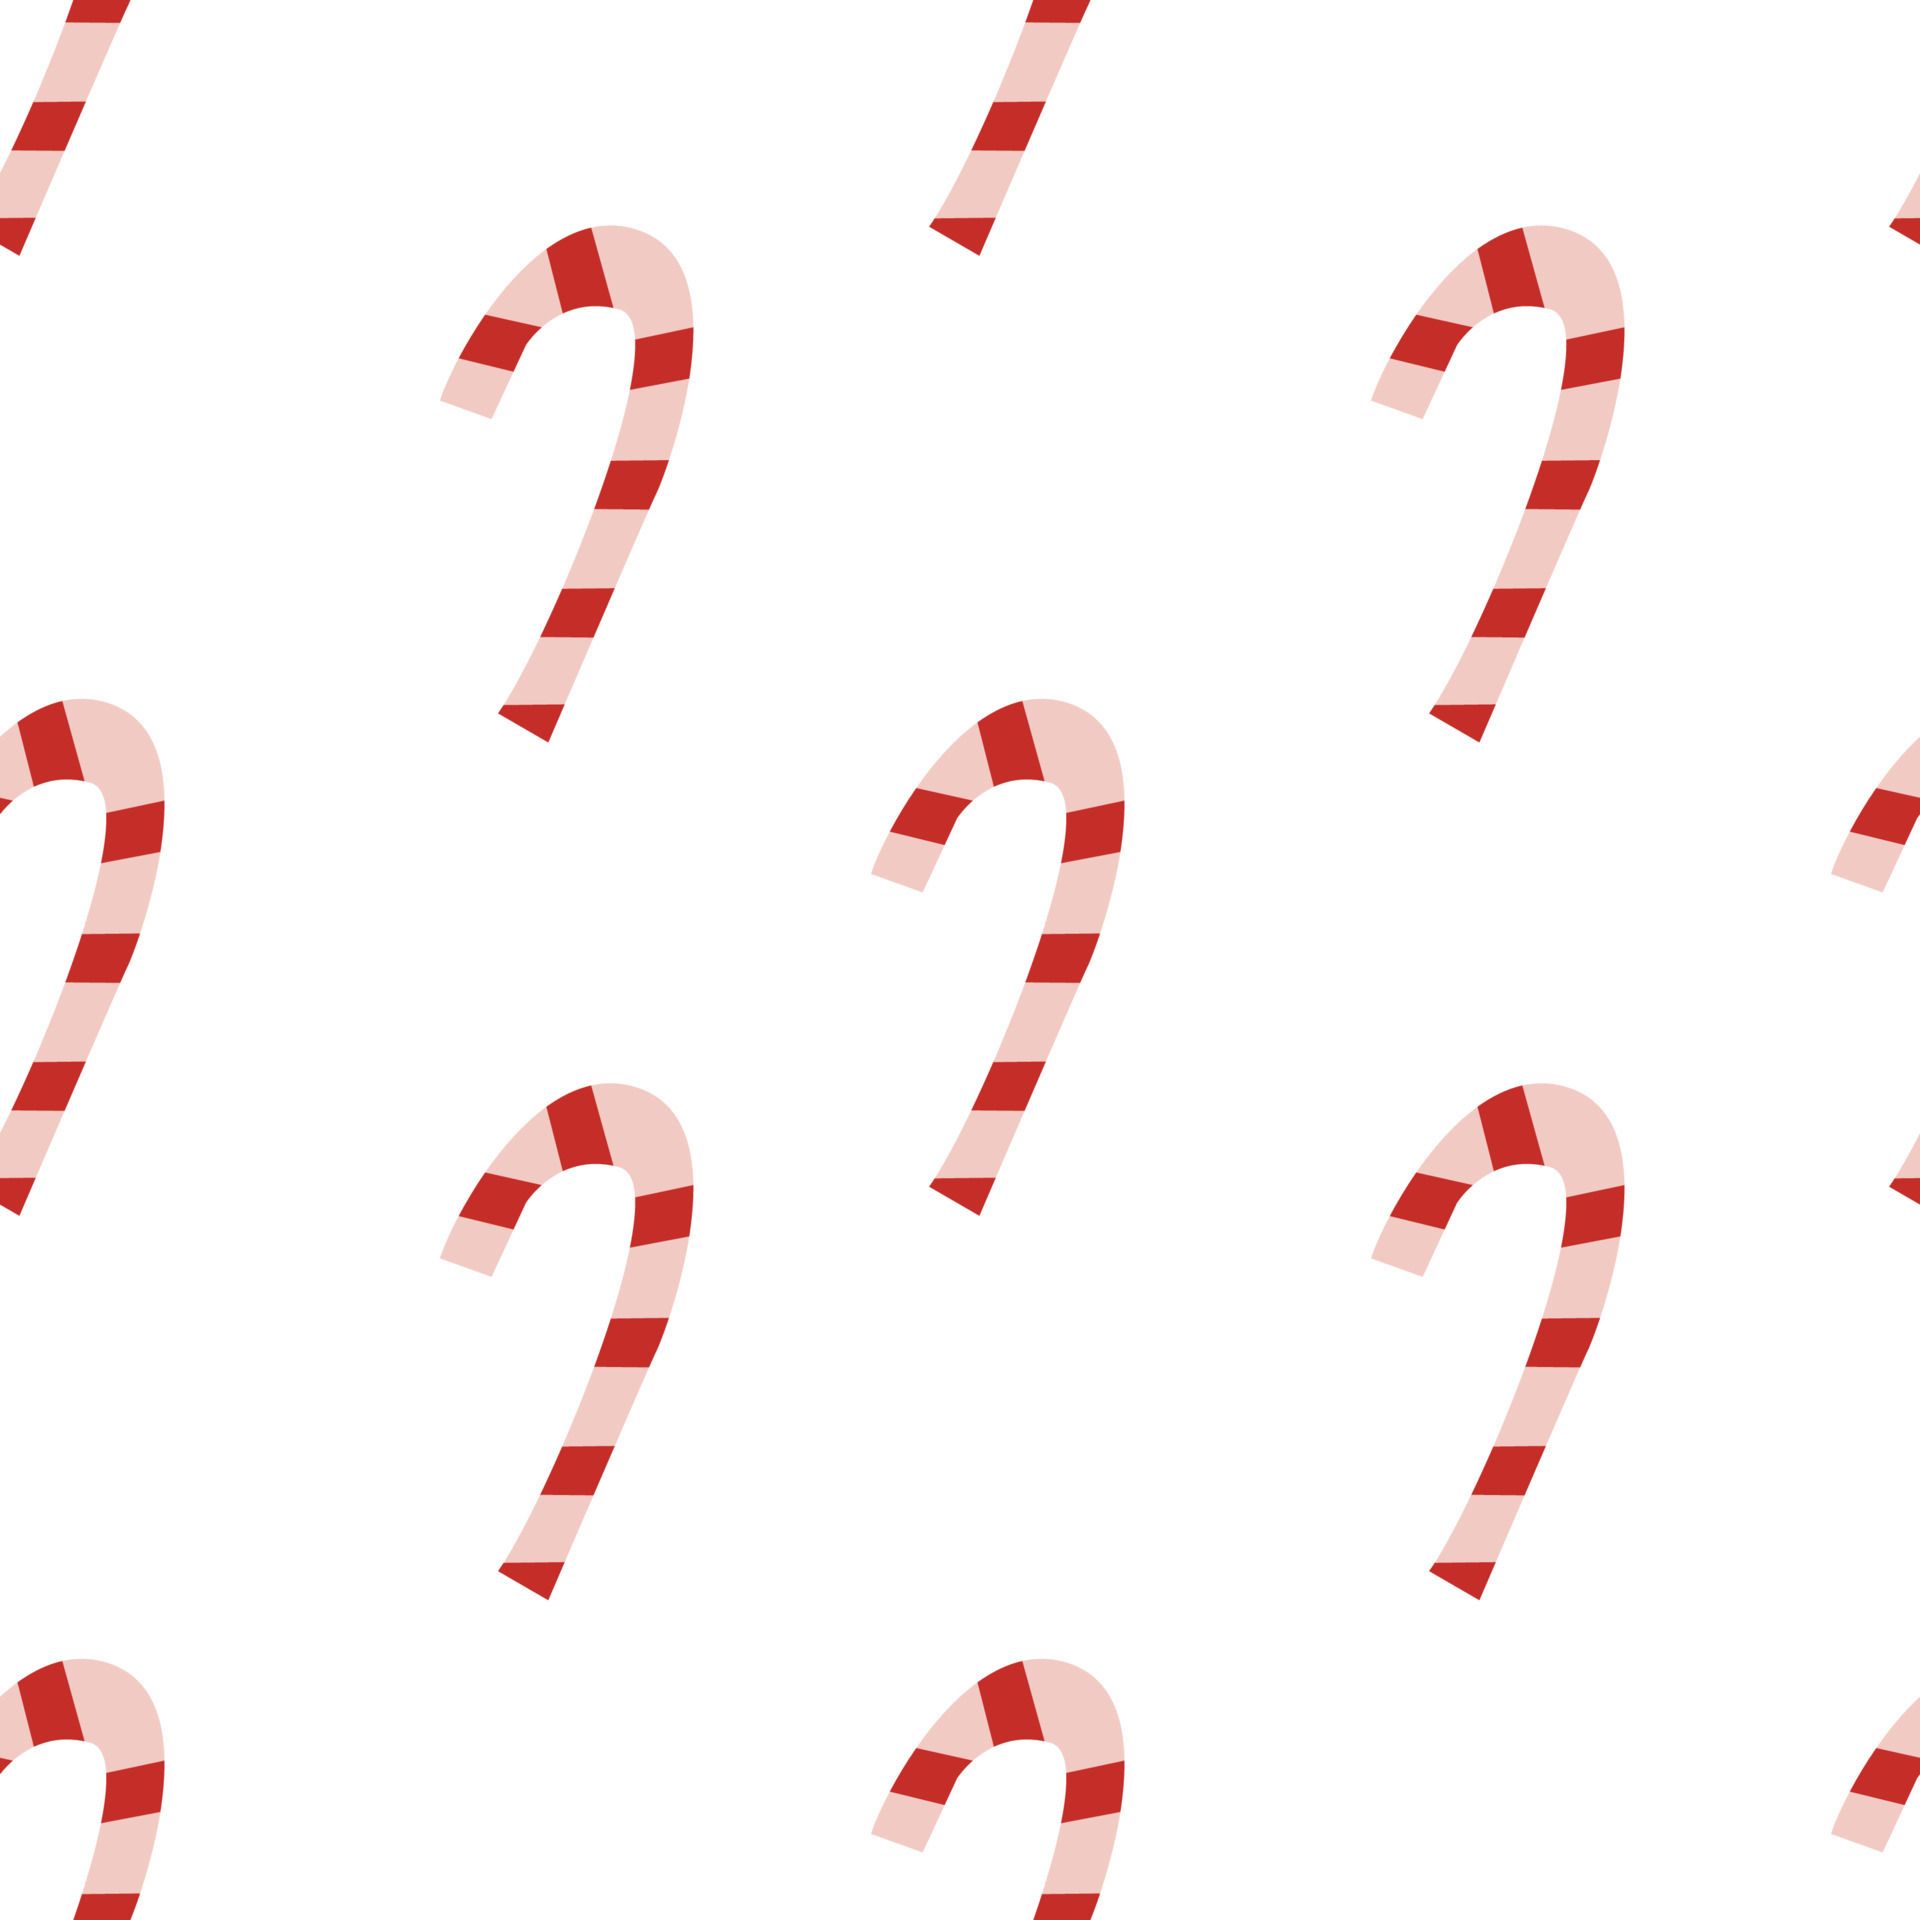 A pattern of candy canes on a white background - Candy cane